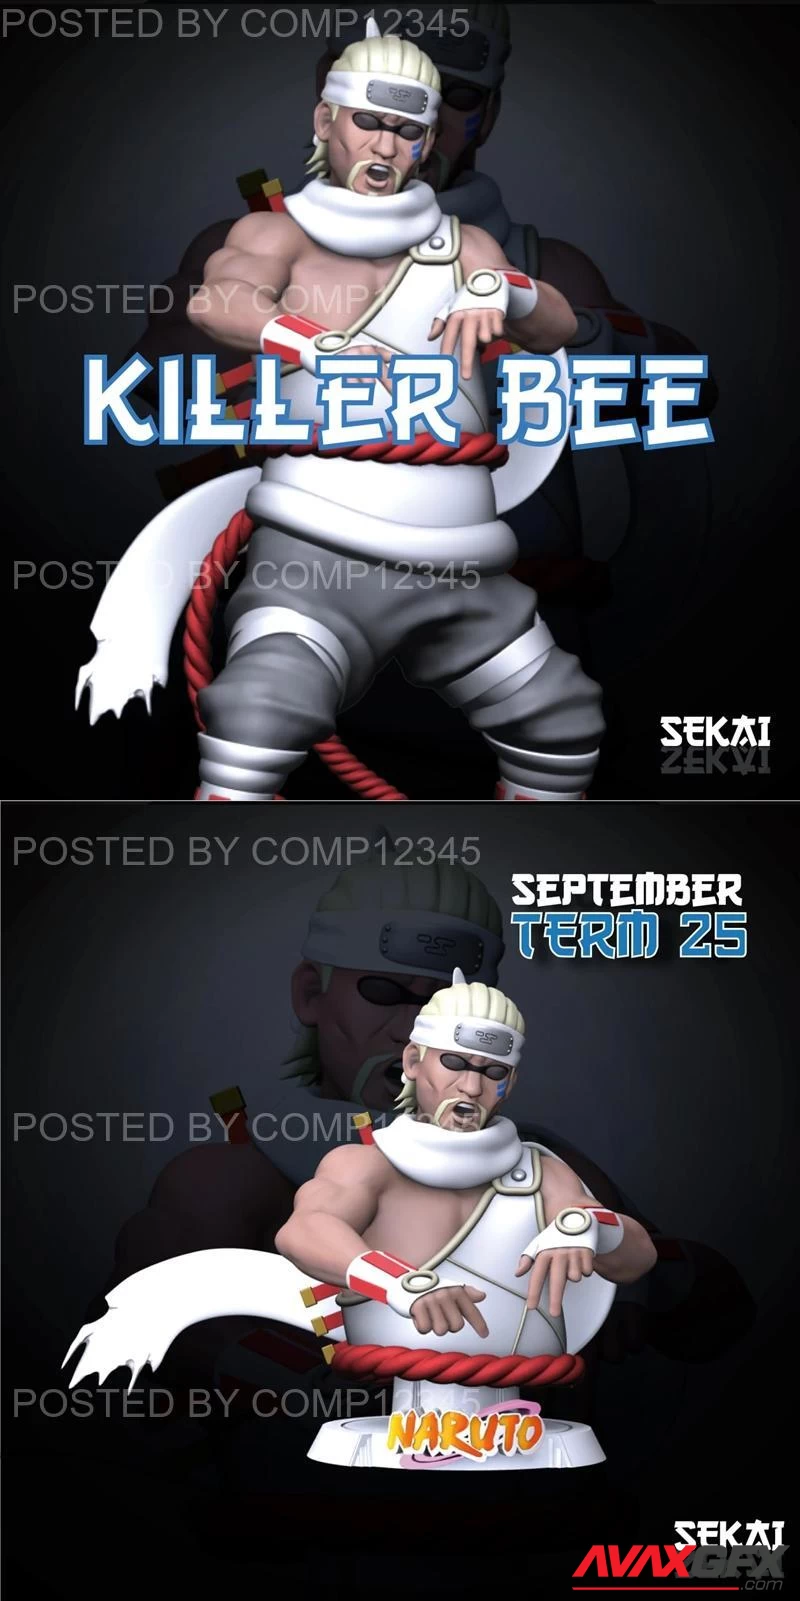 Sekai – Killer Bee Statue and Bust